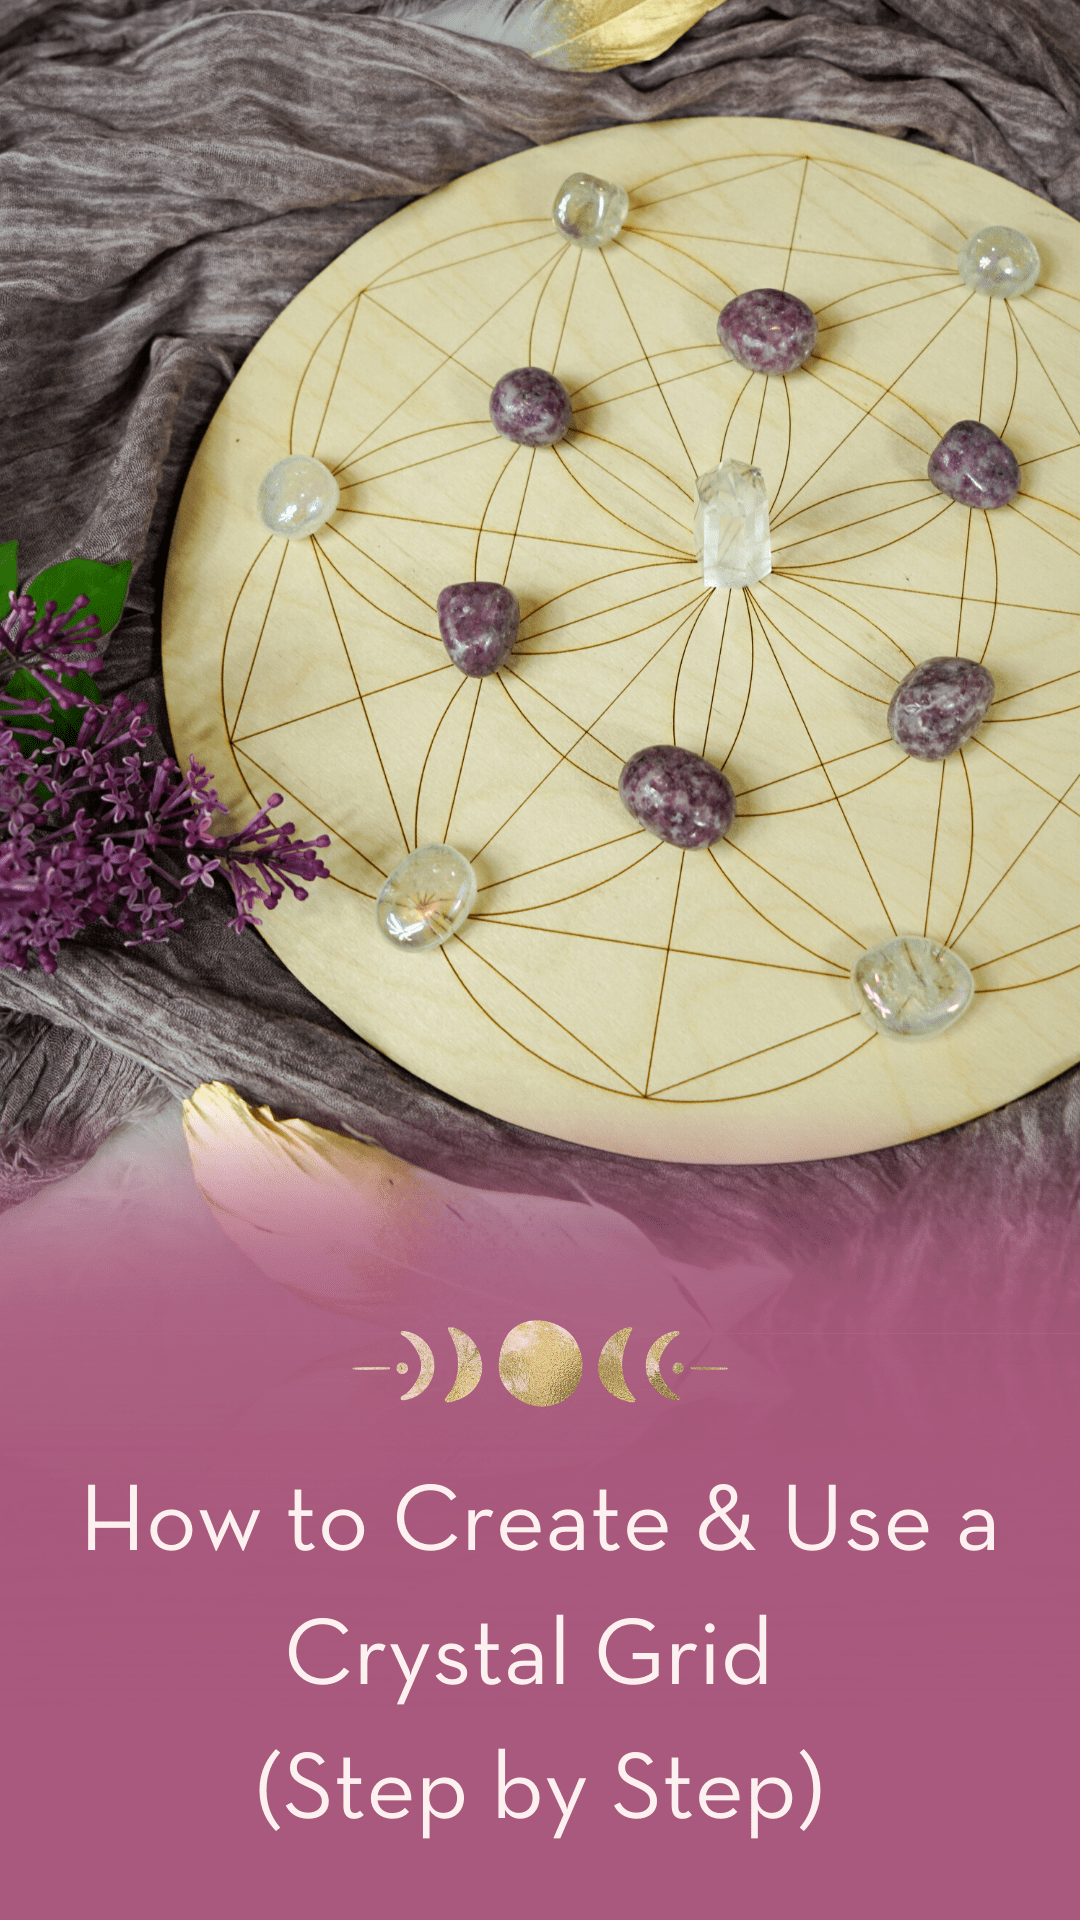 How to create and use a crystal grid